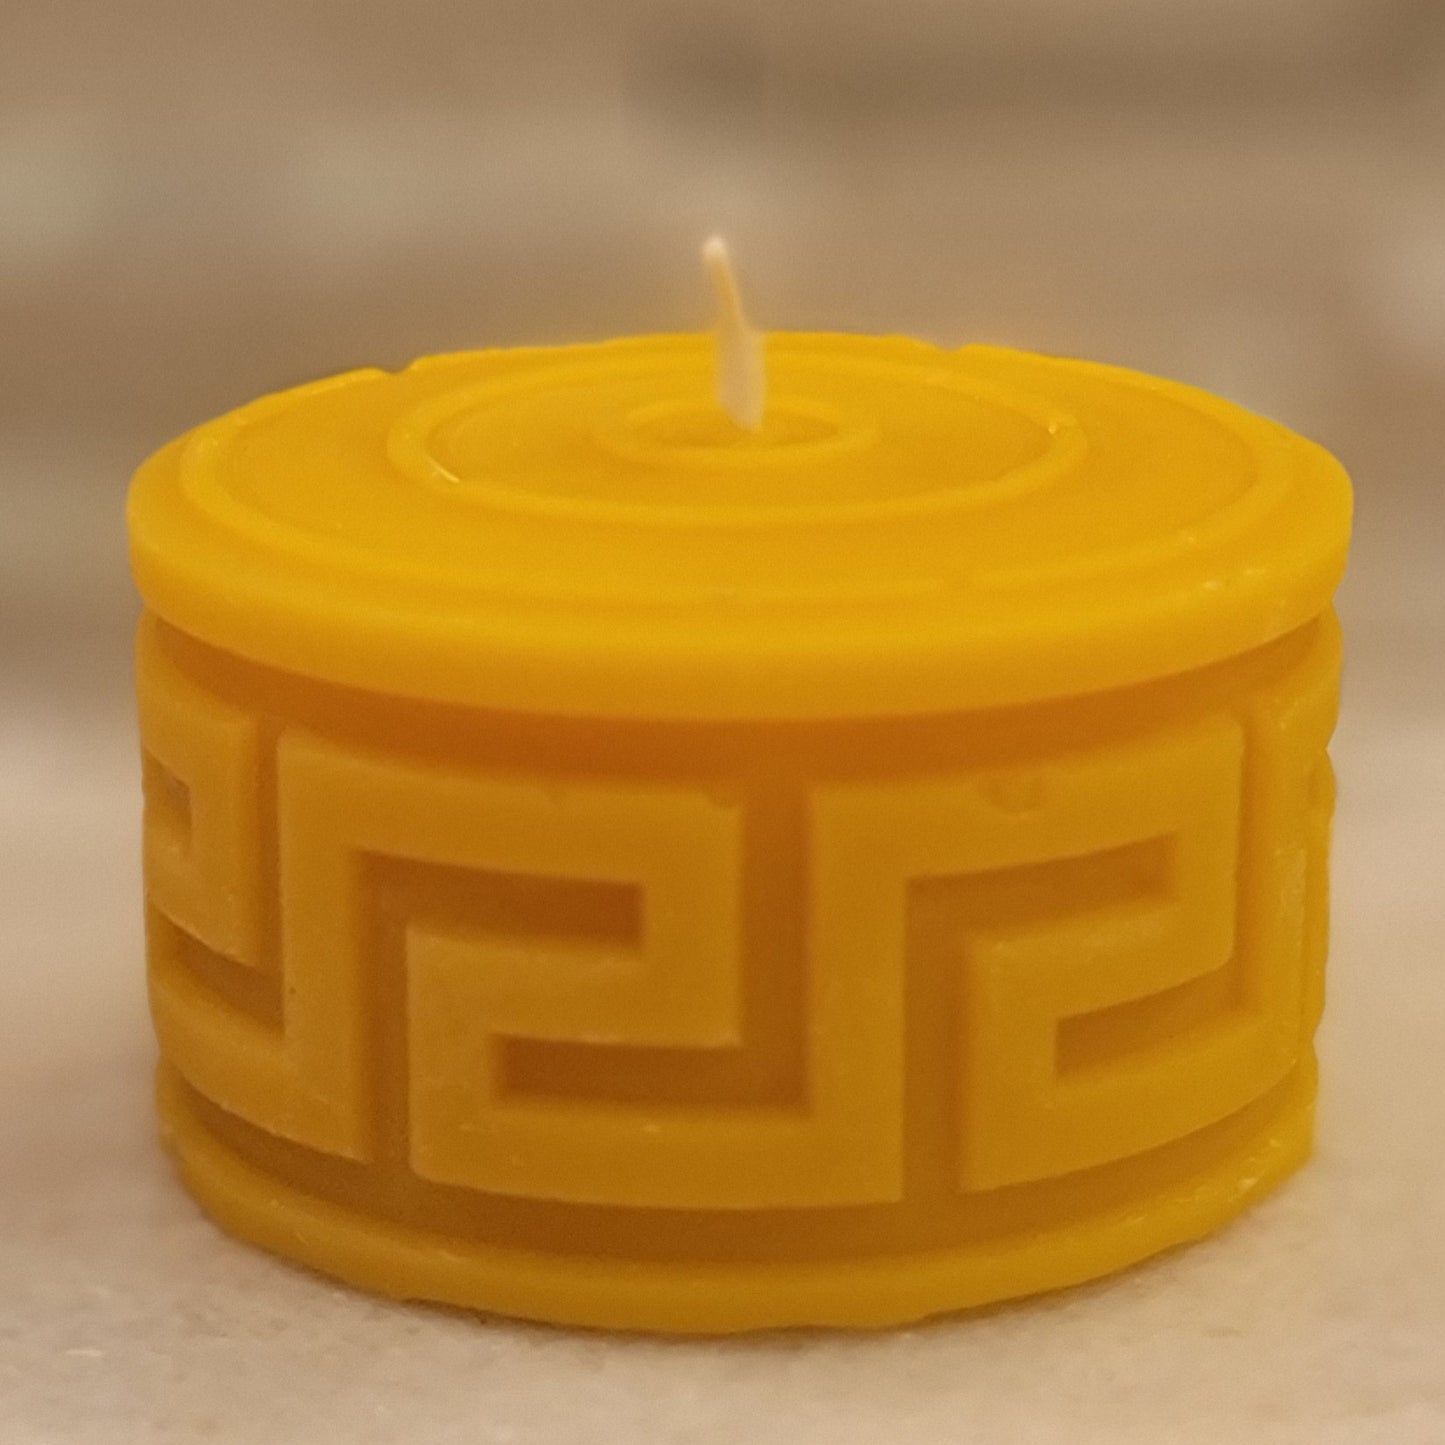 patterned bees wax candle